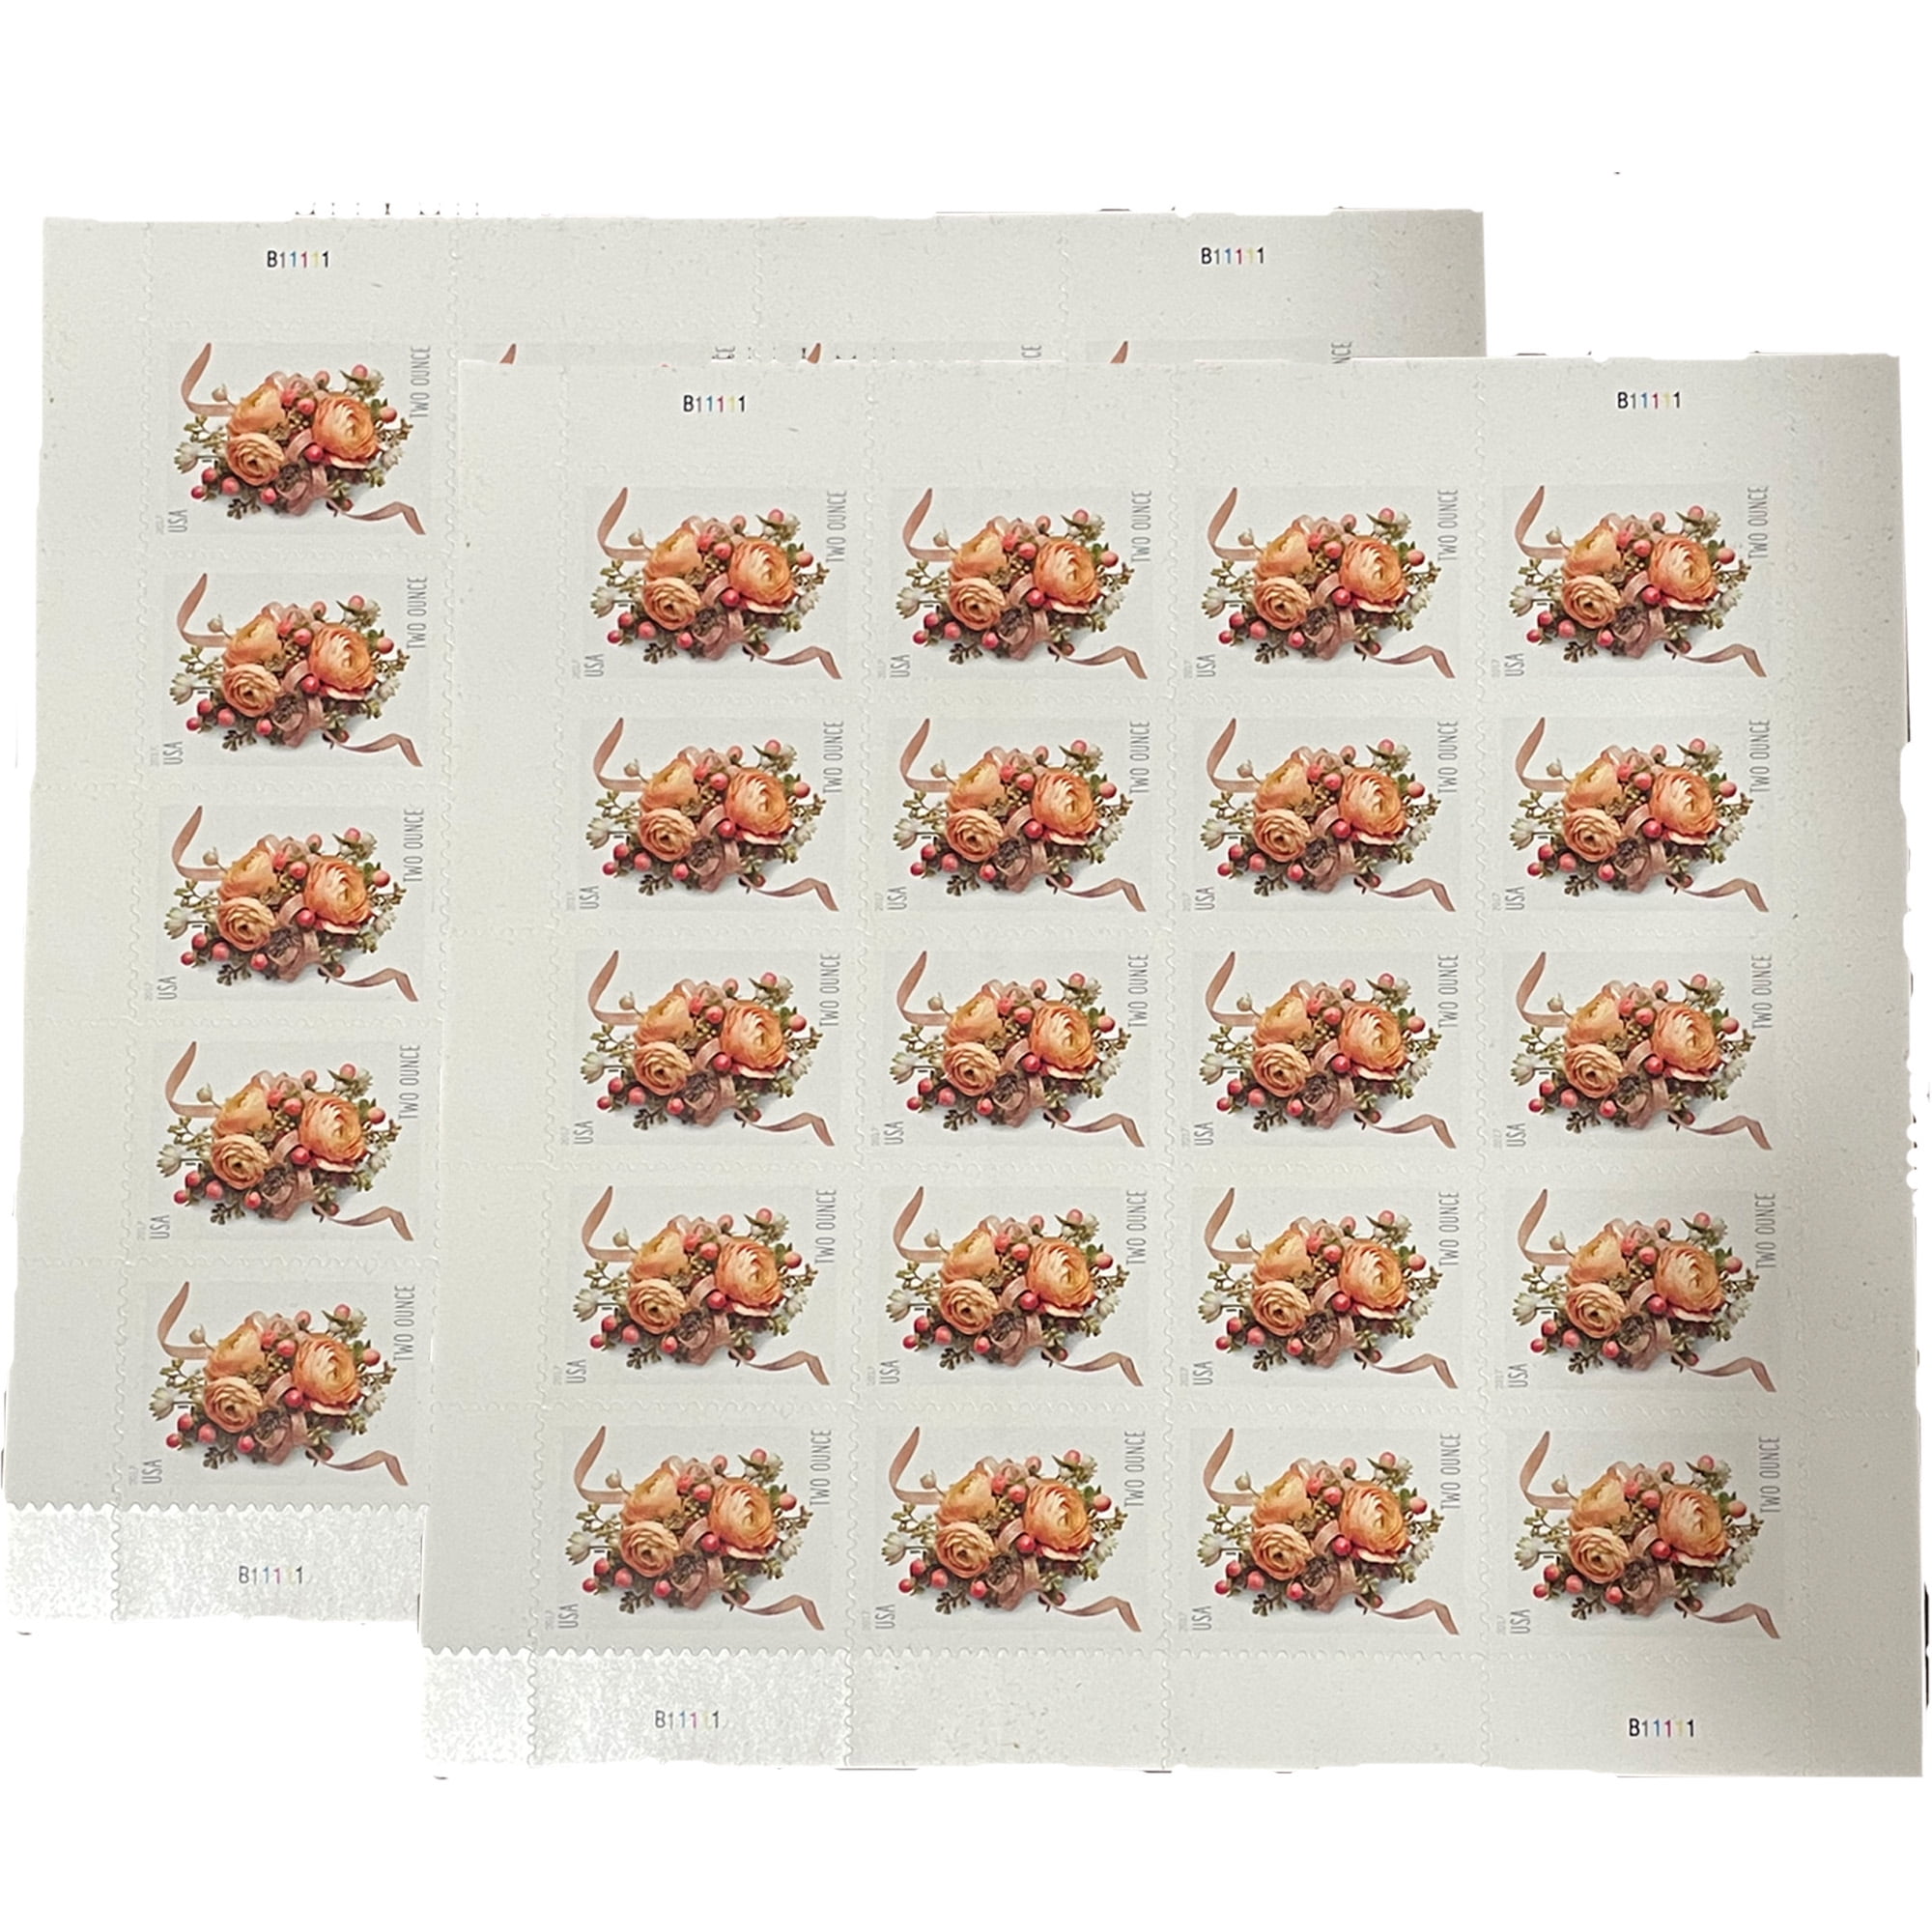 Garden Corsage Wedding Invitations Mint Sheet of 20 Two Ounce Rate Postage  Stamps Scott 5458